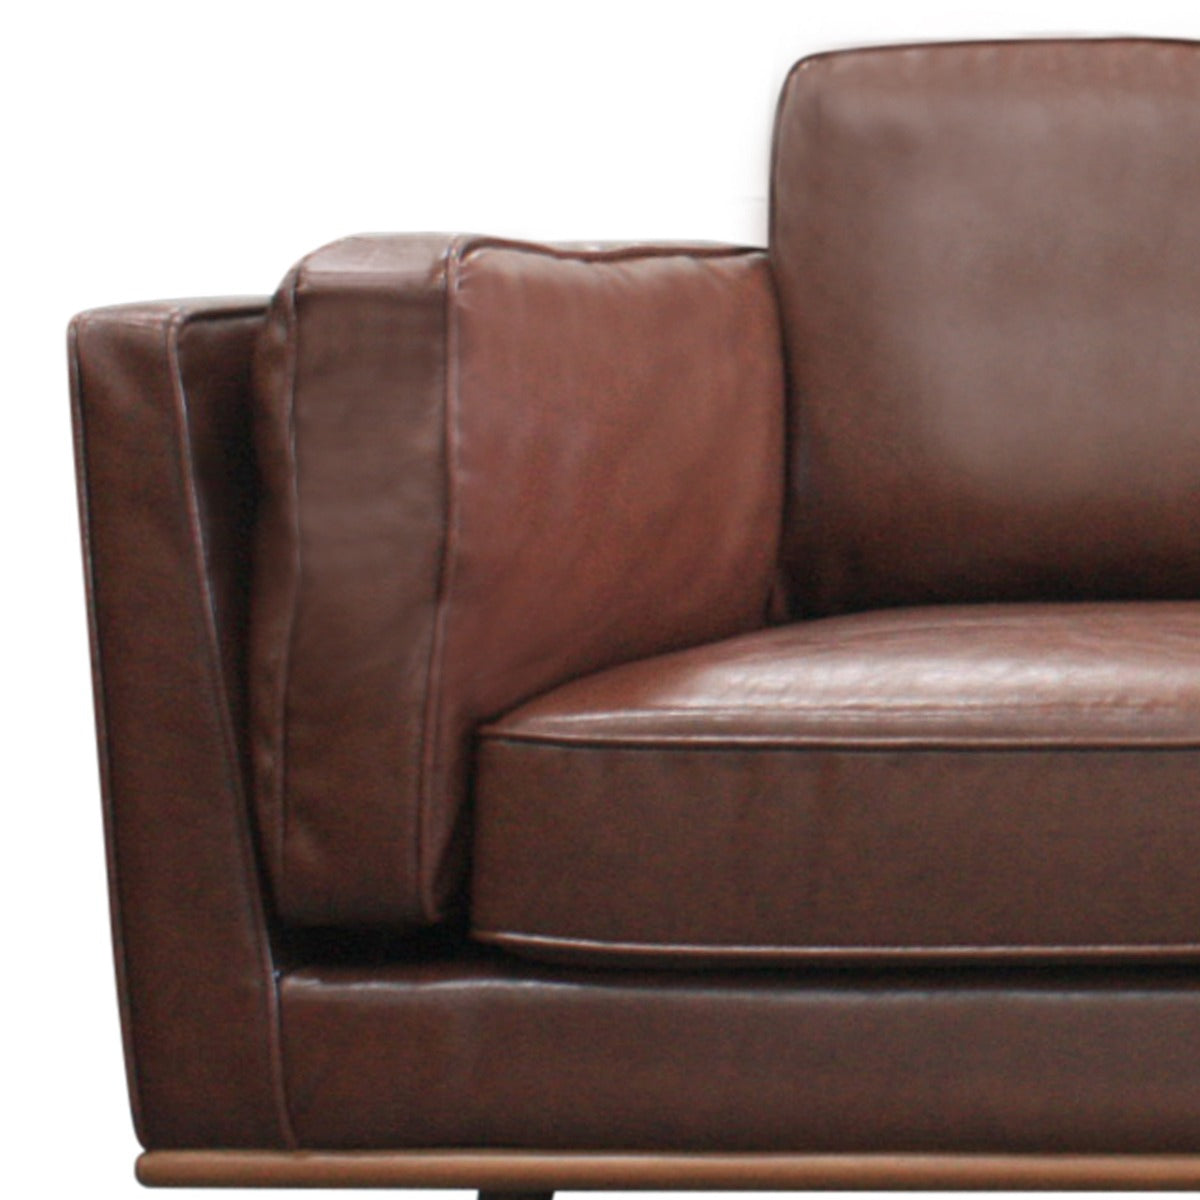 Rebo Faux Sofa 2 Seater with Solid Wooden Frame - Brown - Notbrand